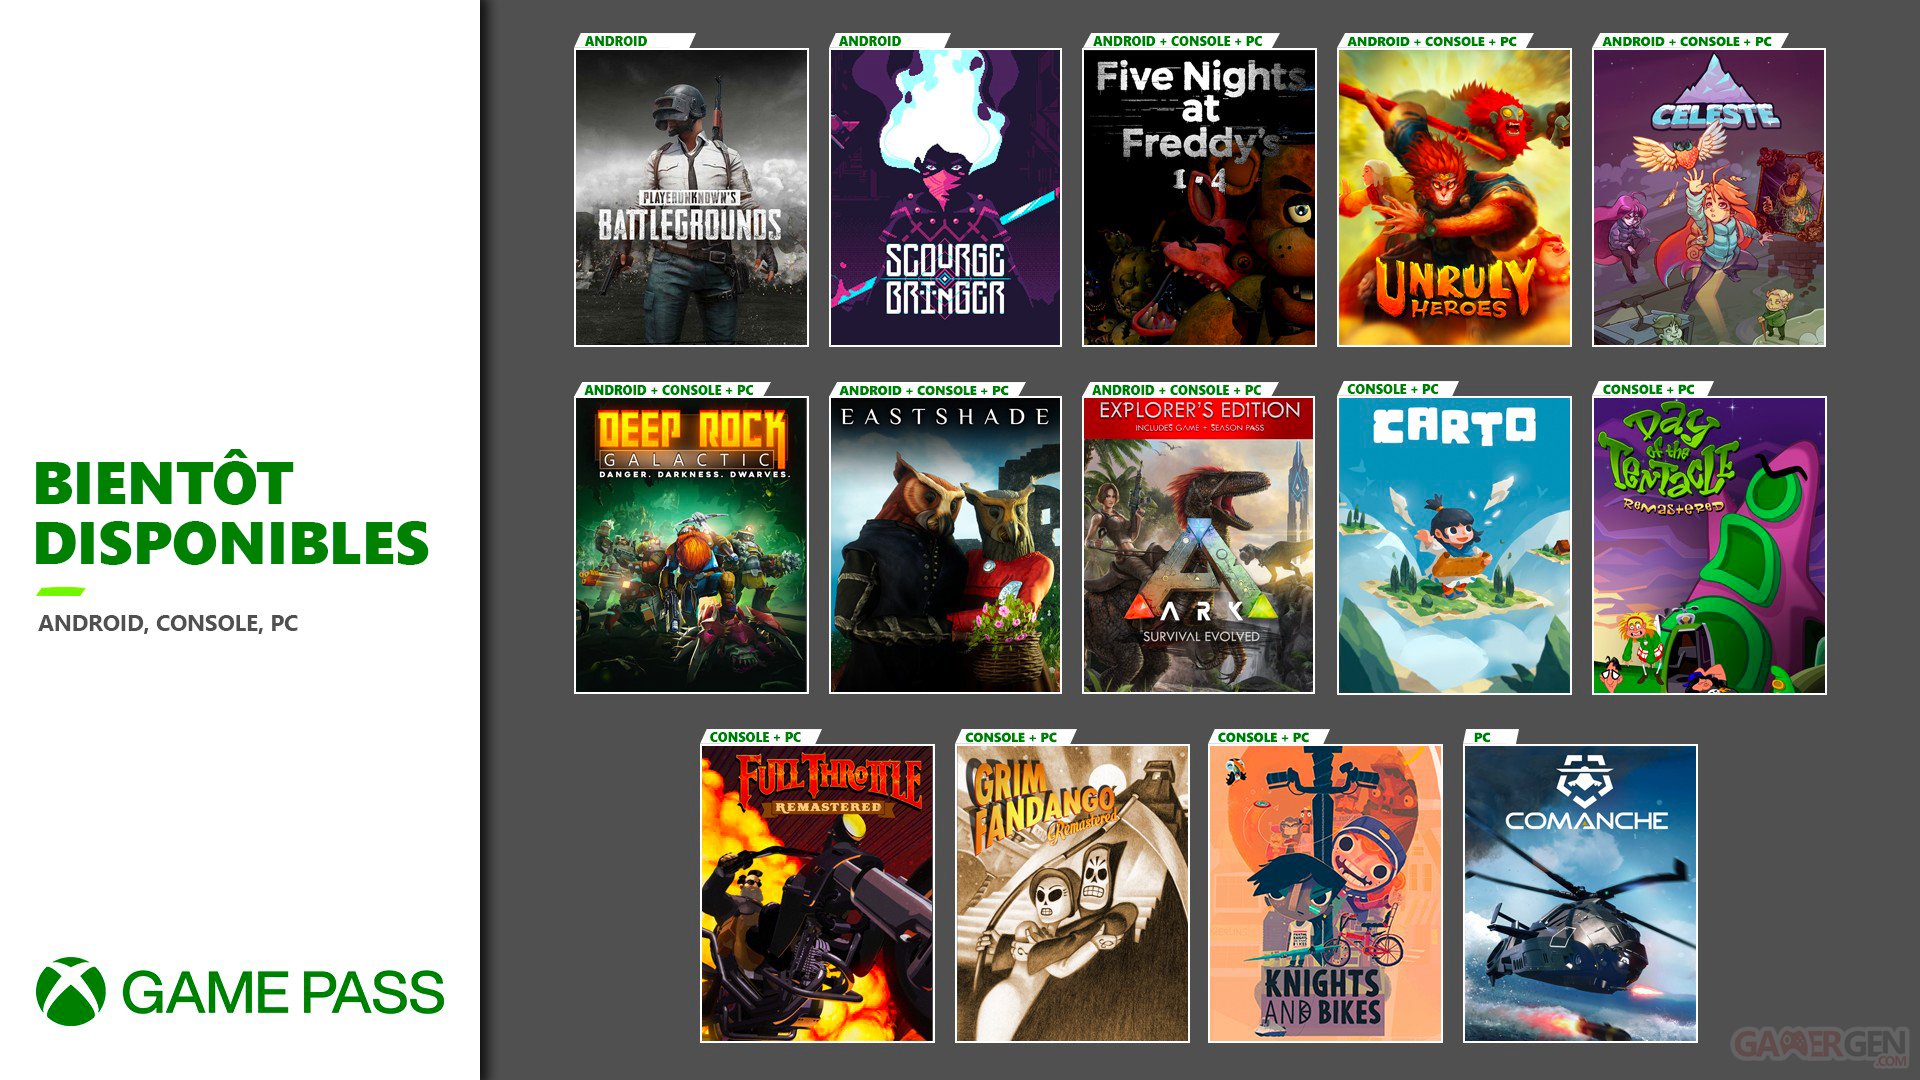 xbox one game pass for pc games list